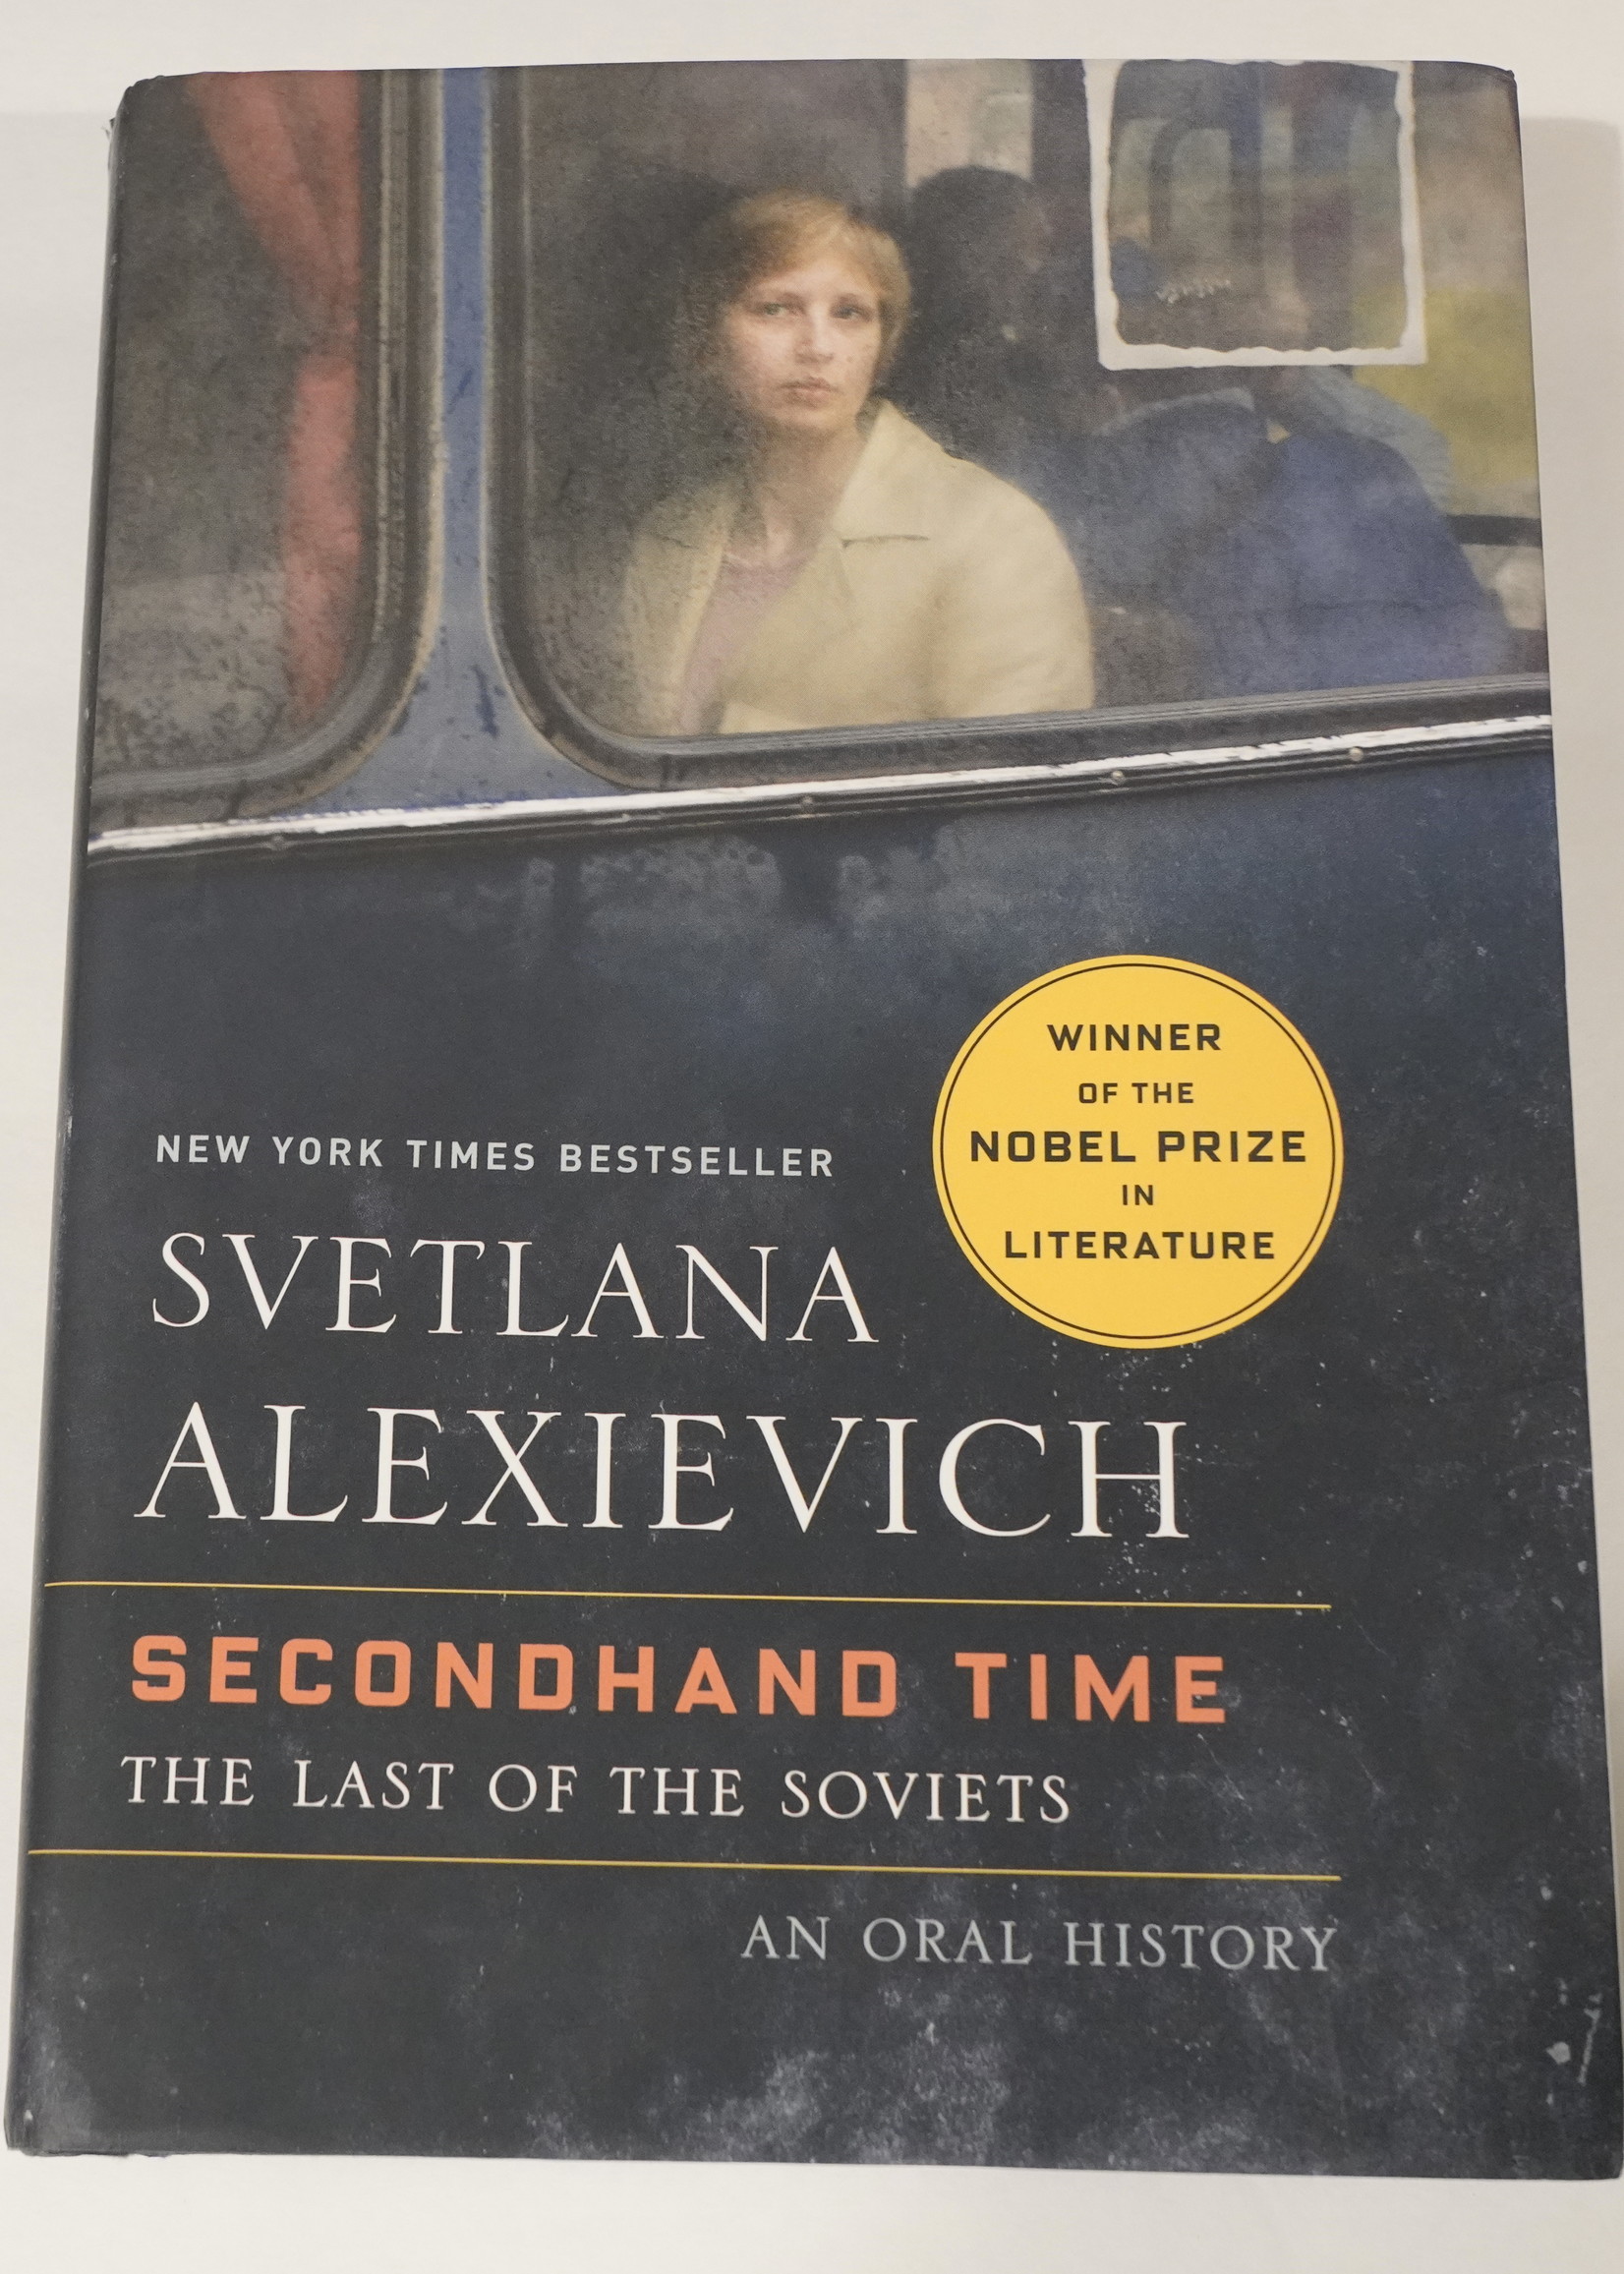 Secondhand Time - The Last of the Soviets